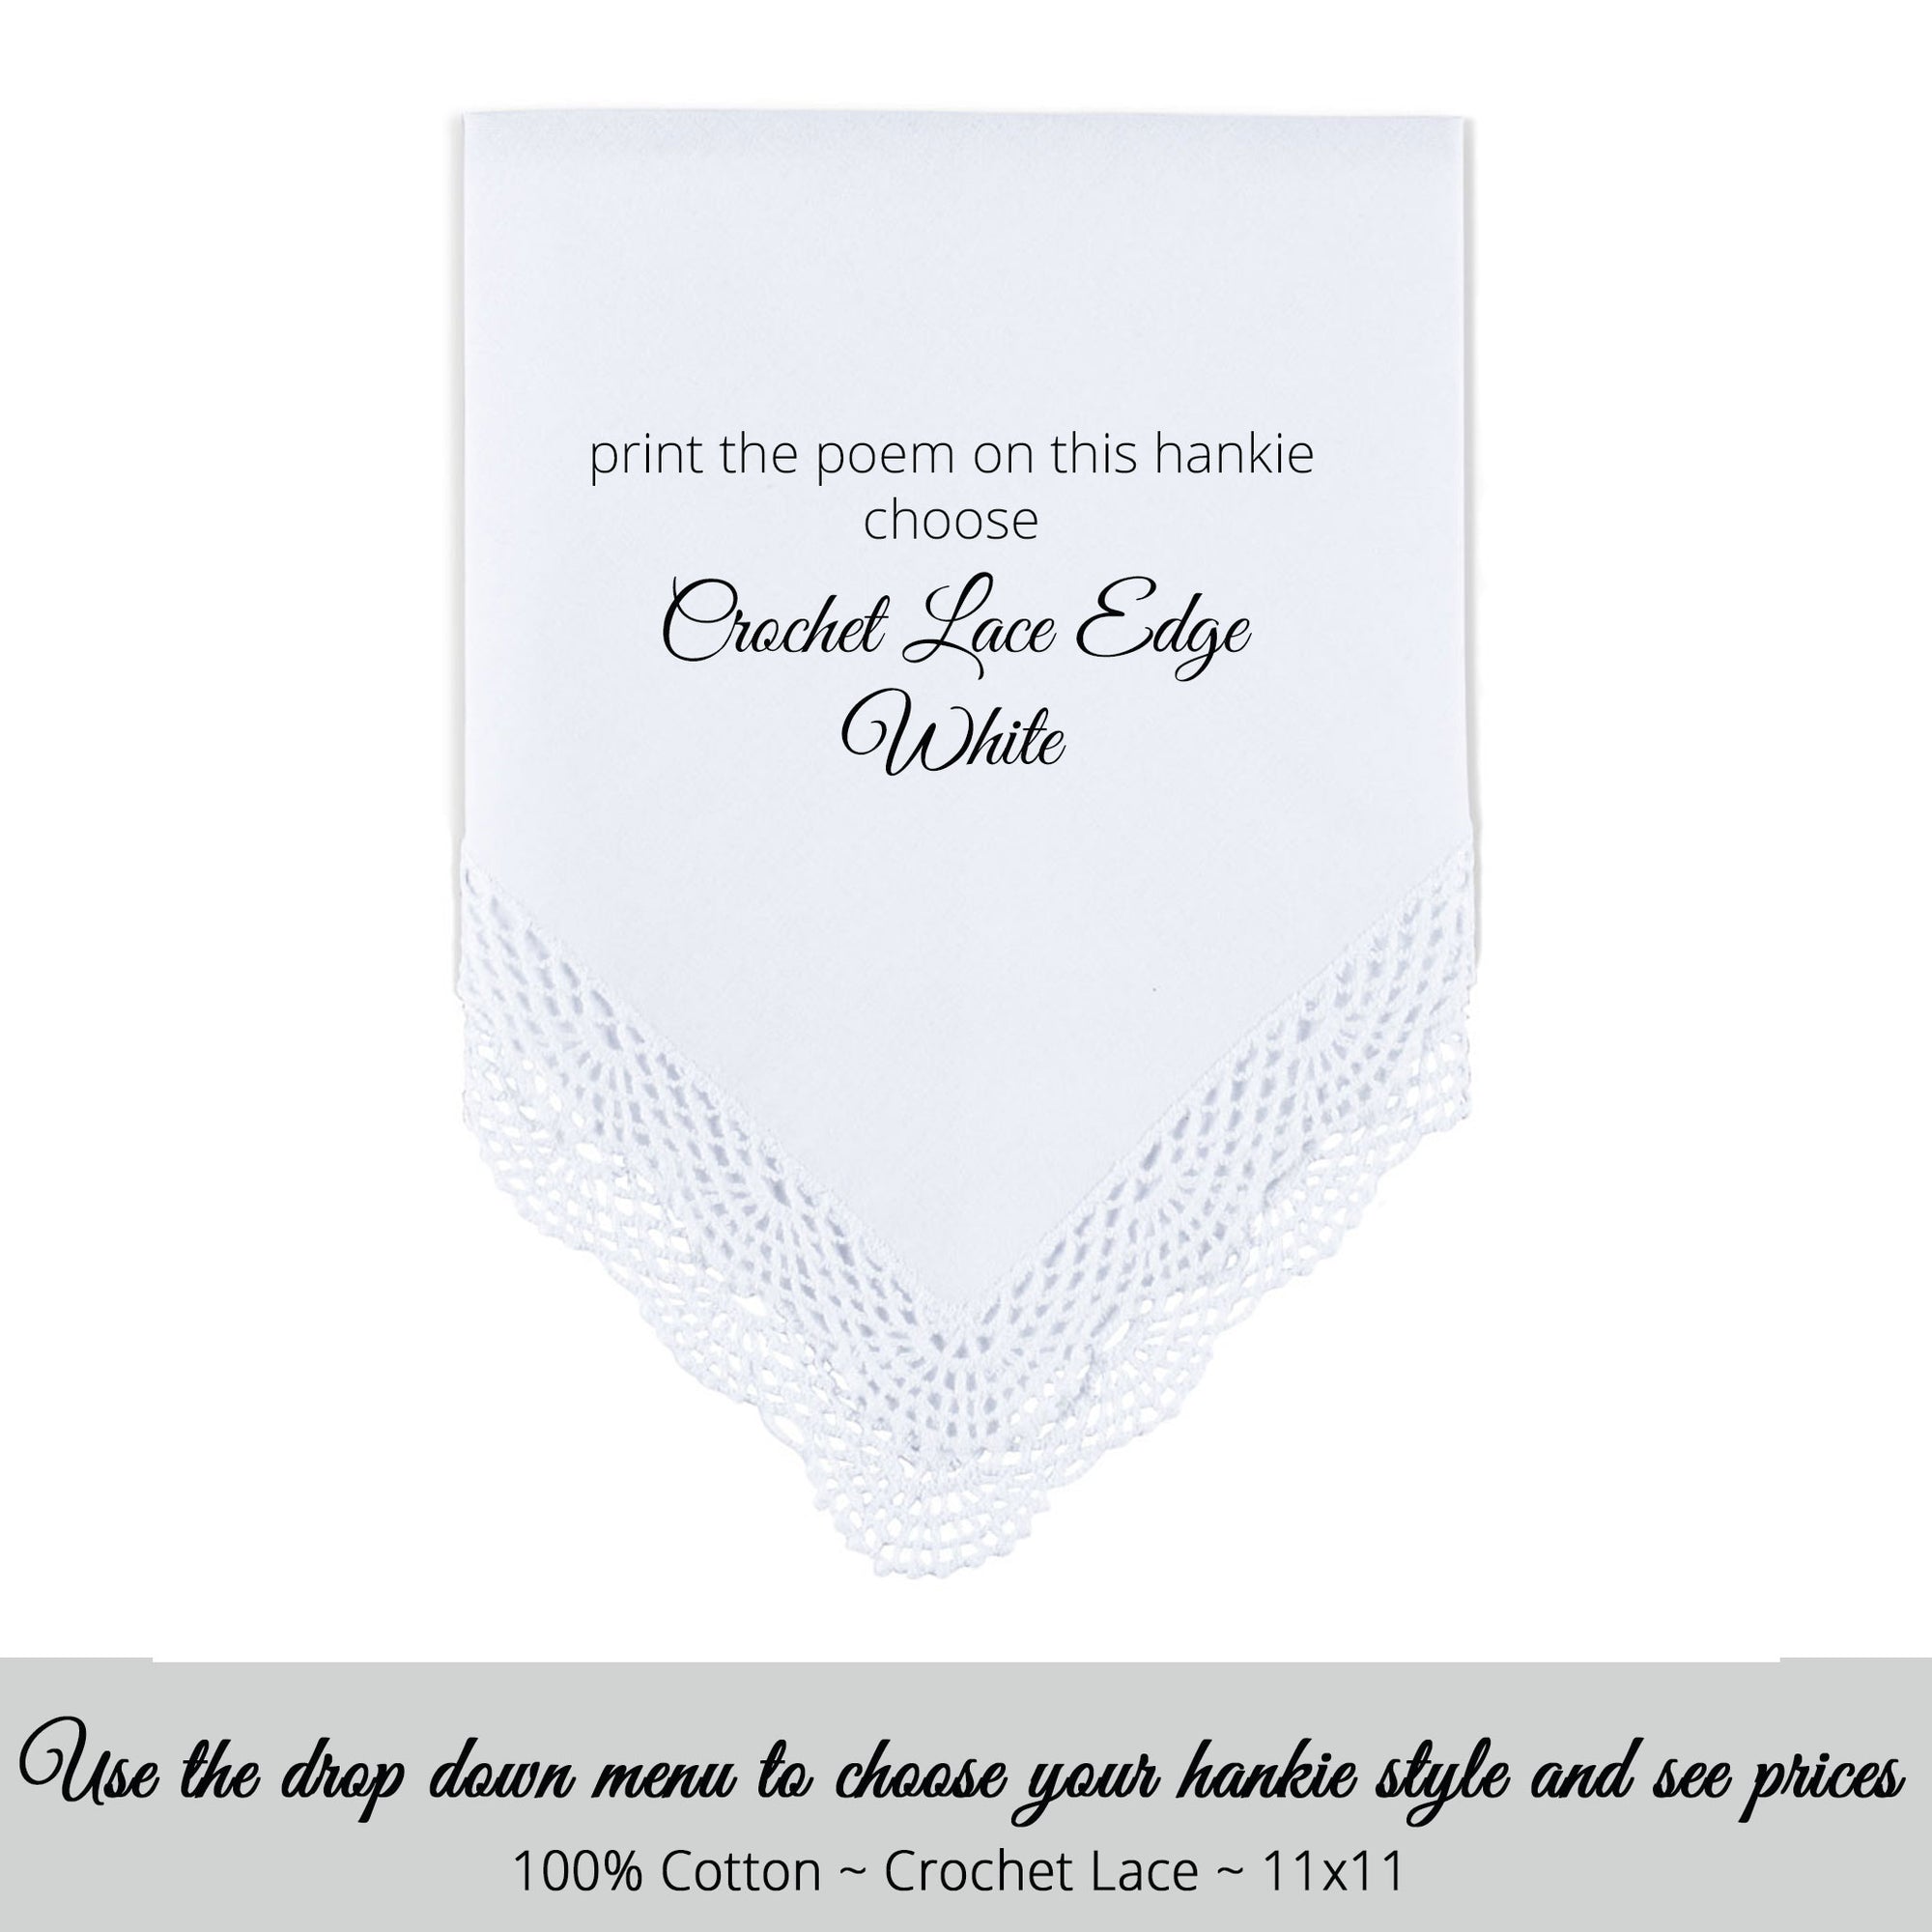 Wedding handkerchief white with crochet lace edge poem printed hankie for the grandmother of the groom